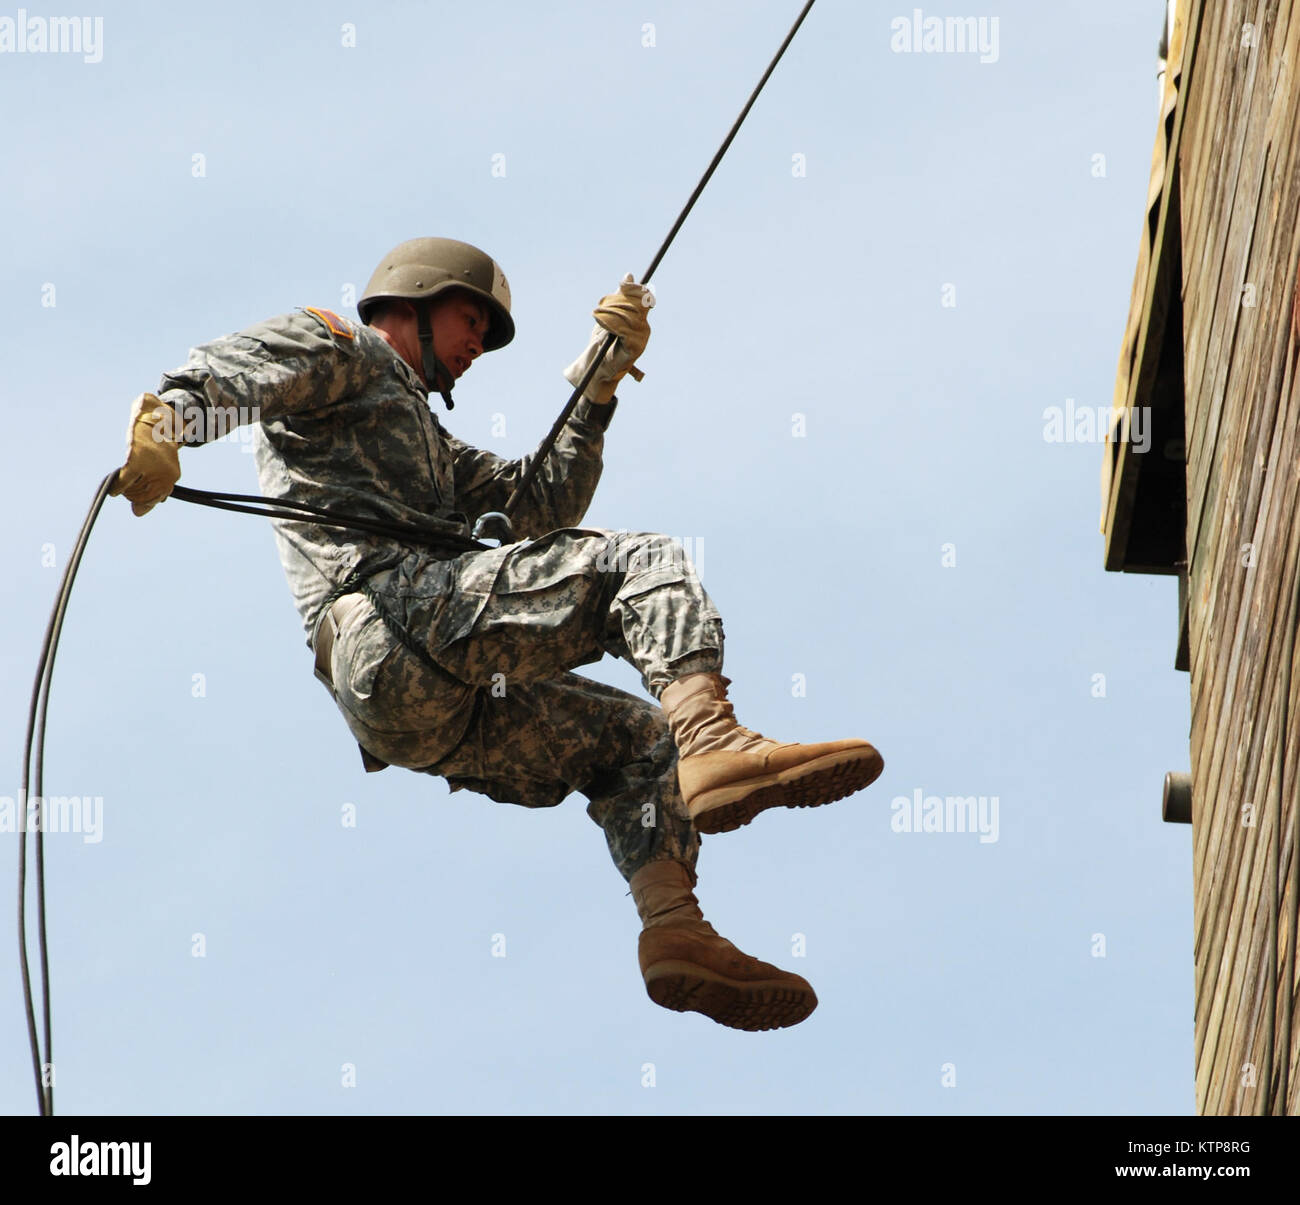 A soldier rappels from the training tower at Camp Smith, NY during